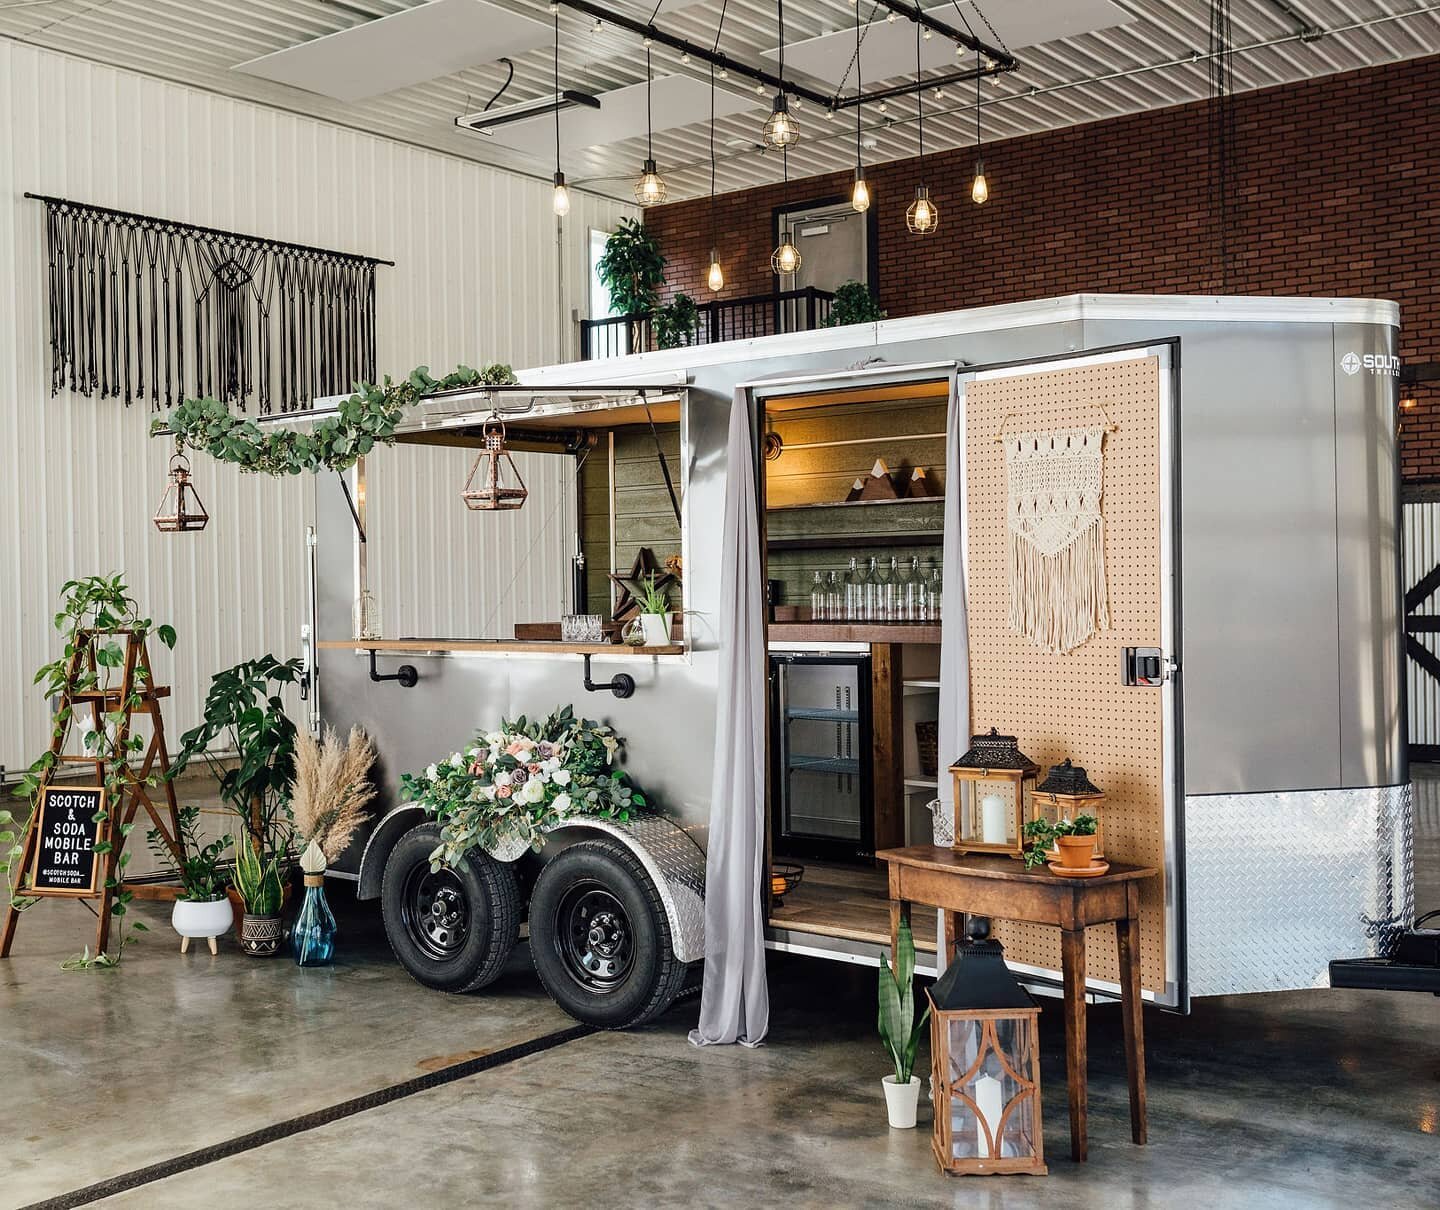 Our trailer was converted with both mobility and functionality in mind; while we are technically compact you will find no shortage of prep-space here. 

We are ready to serve up to 200 guests at your next event and cannot wait for that day to come! 
